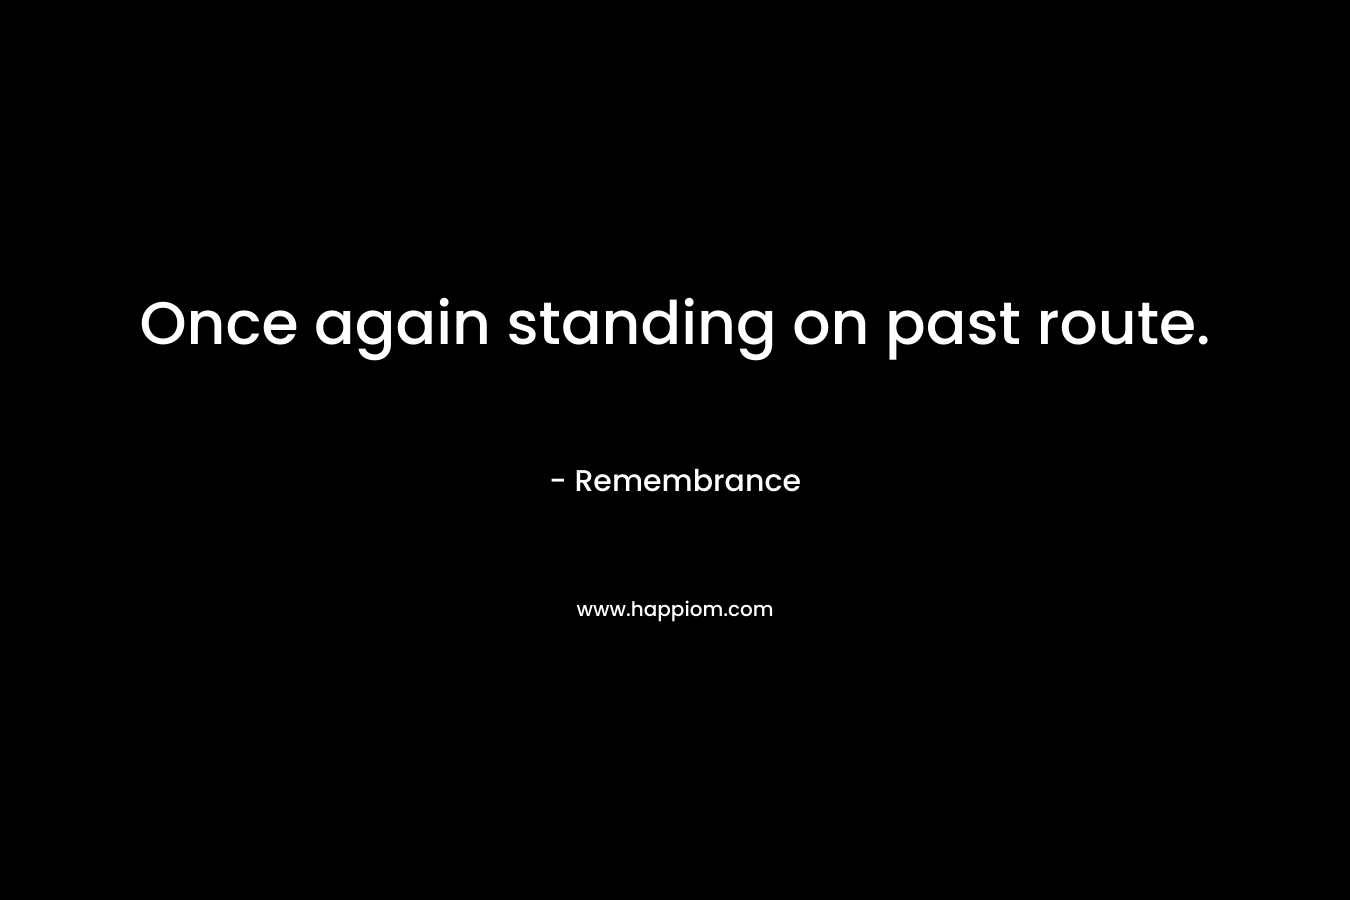 Once again standing on past route. – Remembrance